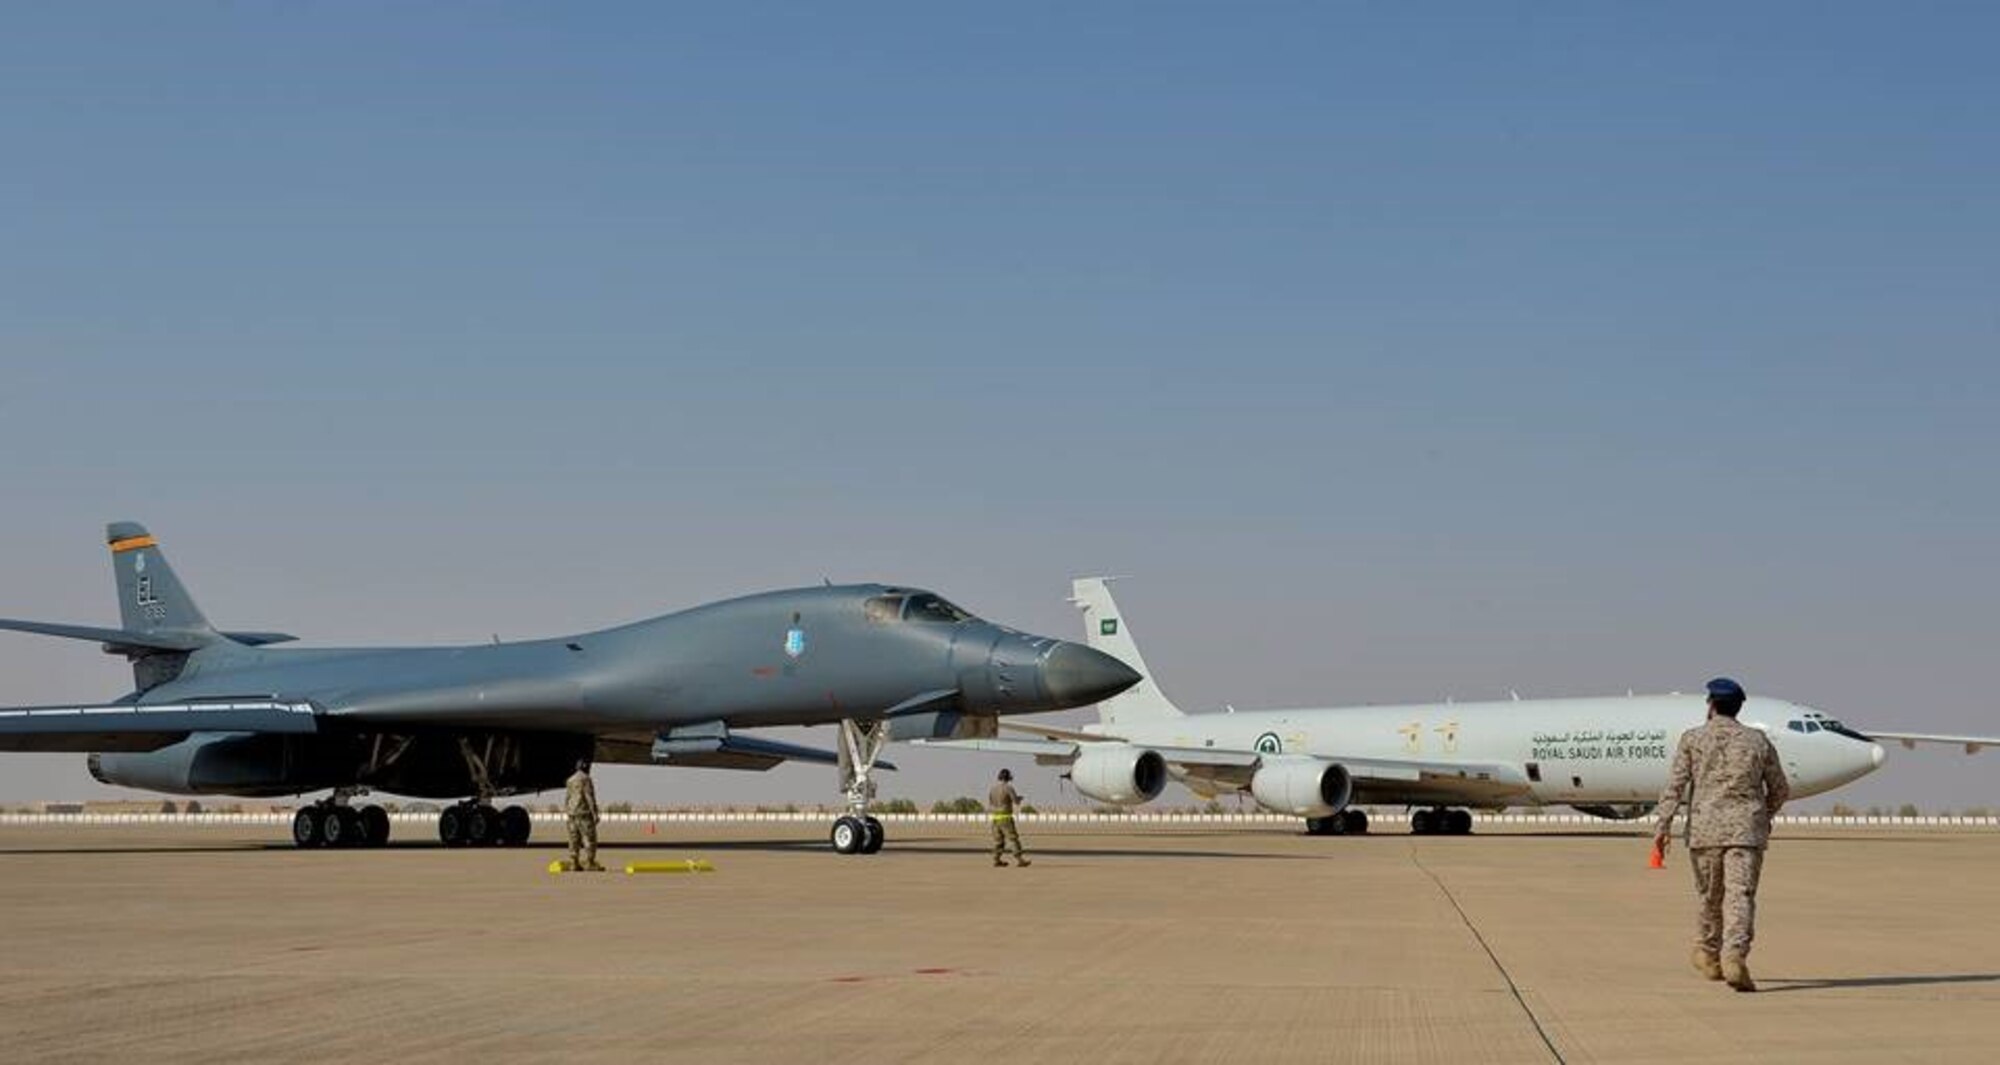 B-1B Lancers from Ellsworth Air Force Base, South Dakota, wait on the flightline after arriving unannounced to Prince Sultan Air Base, Saudi Arabia, Oct. 25, 2019.